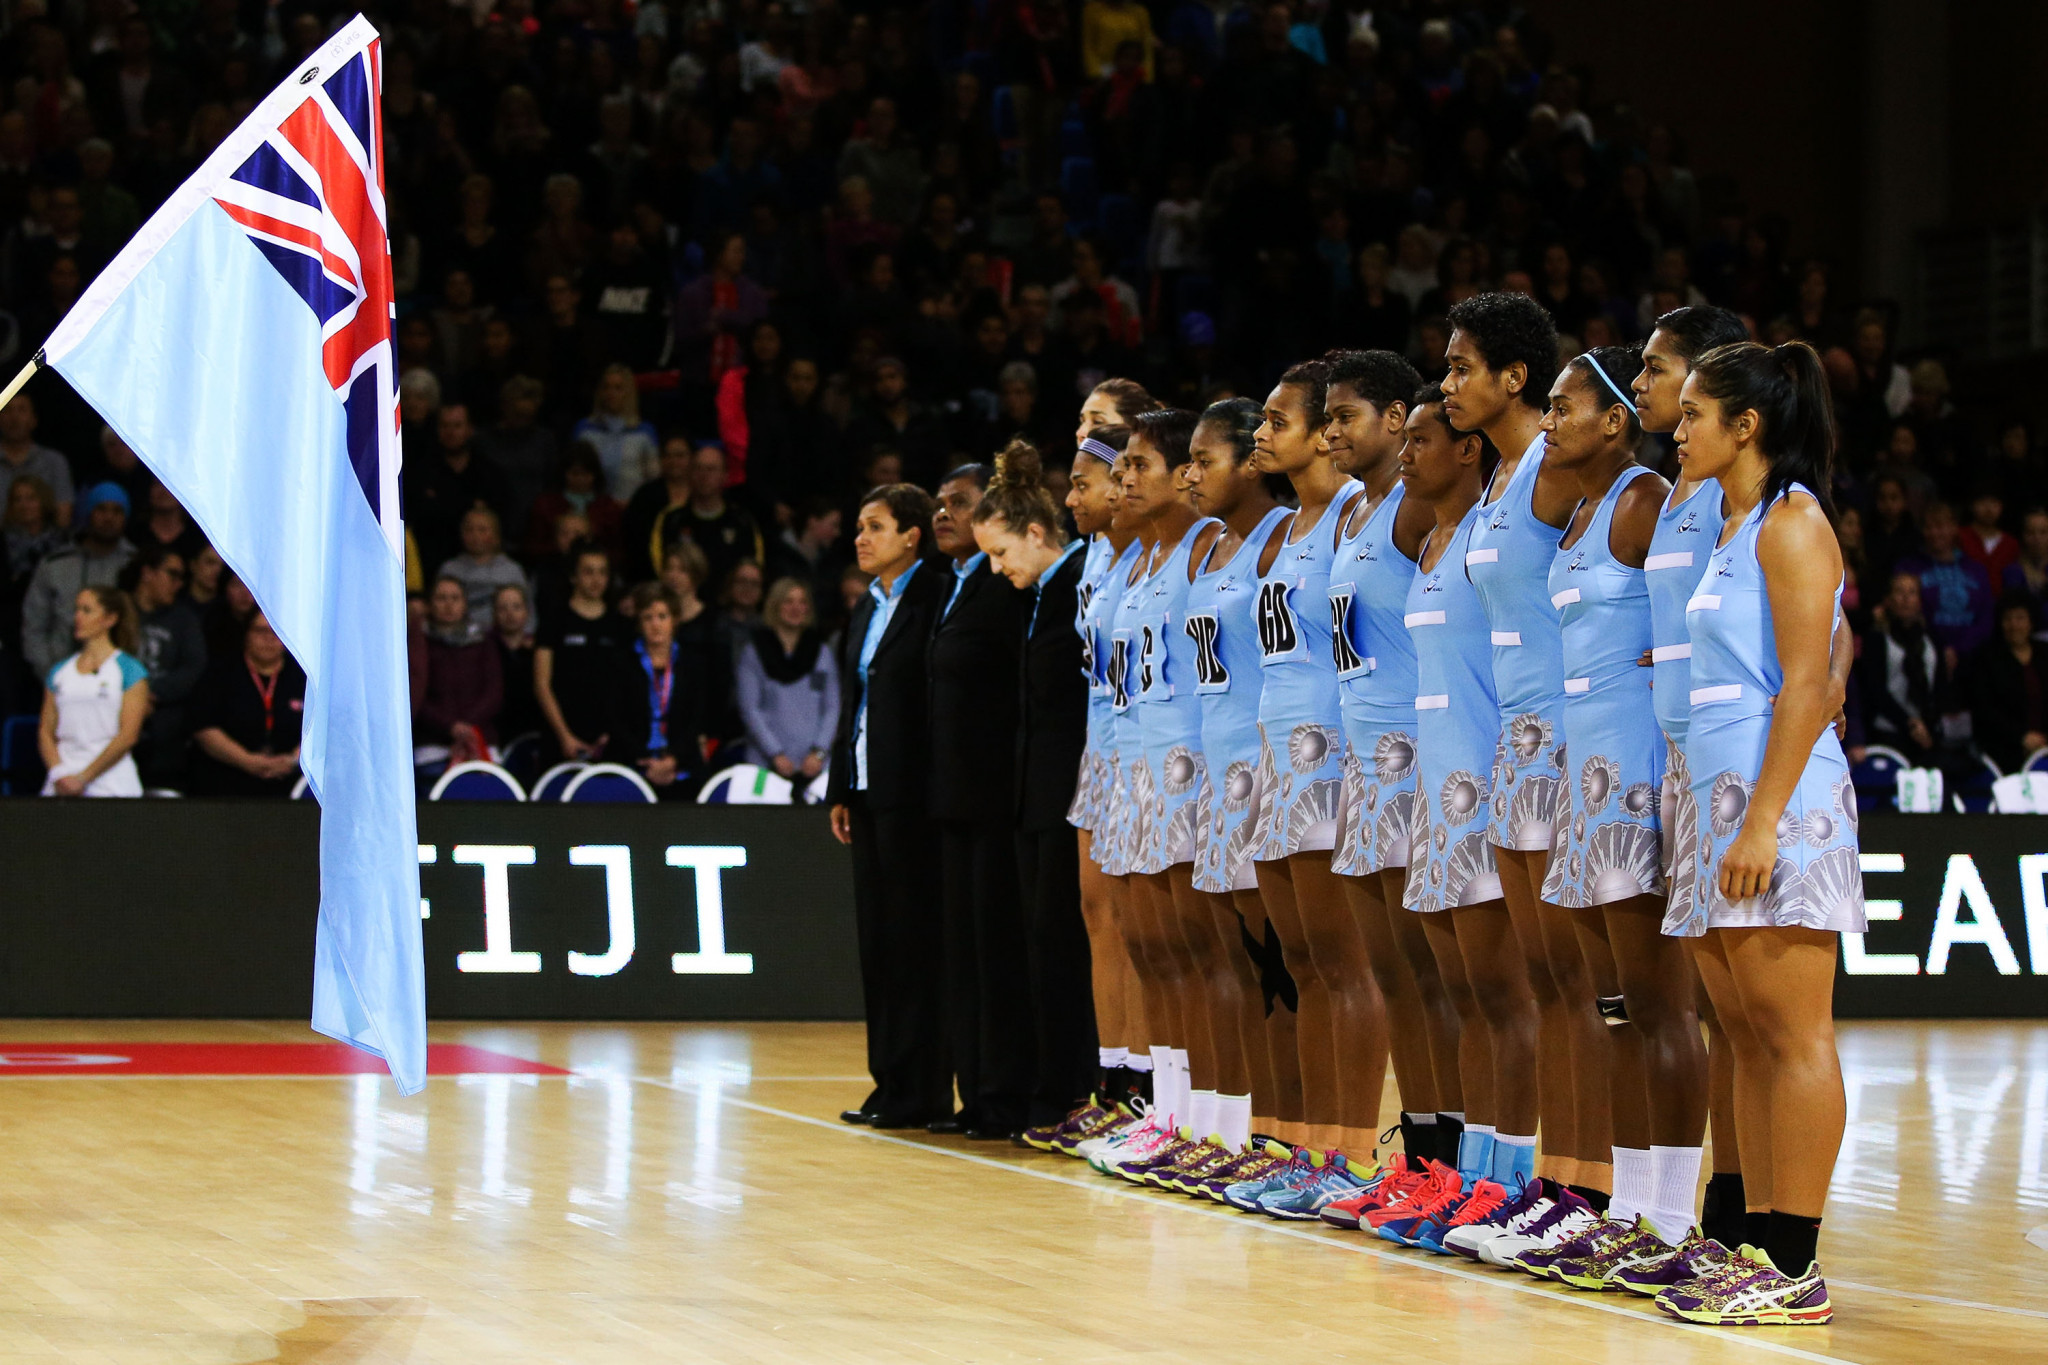 Fiji are also looking to compete at the 2019 Netball World Cup ©Getty Images